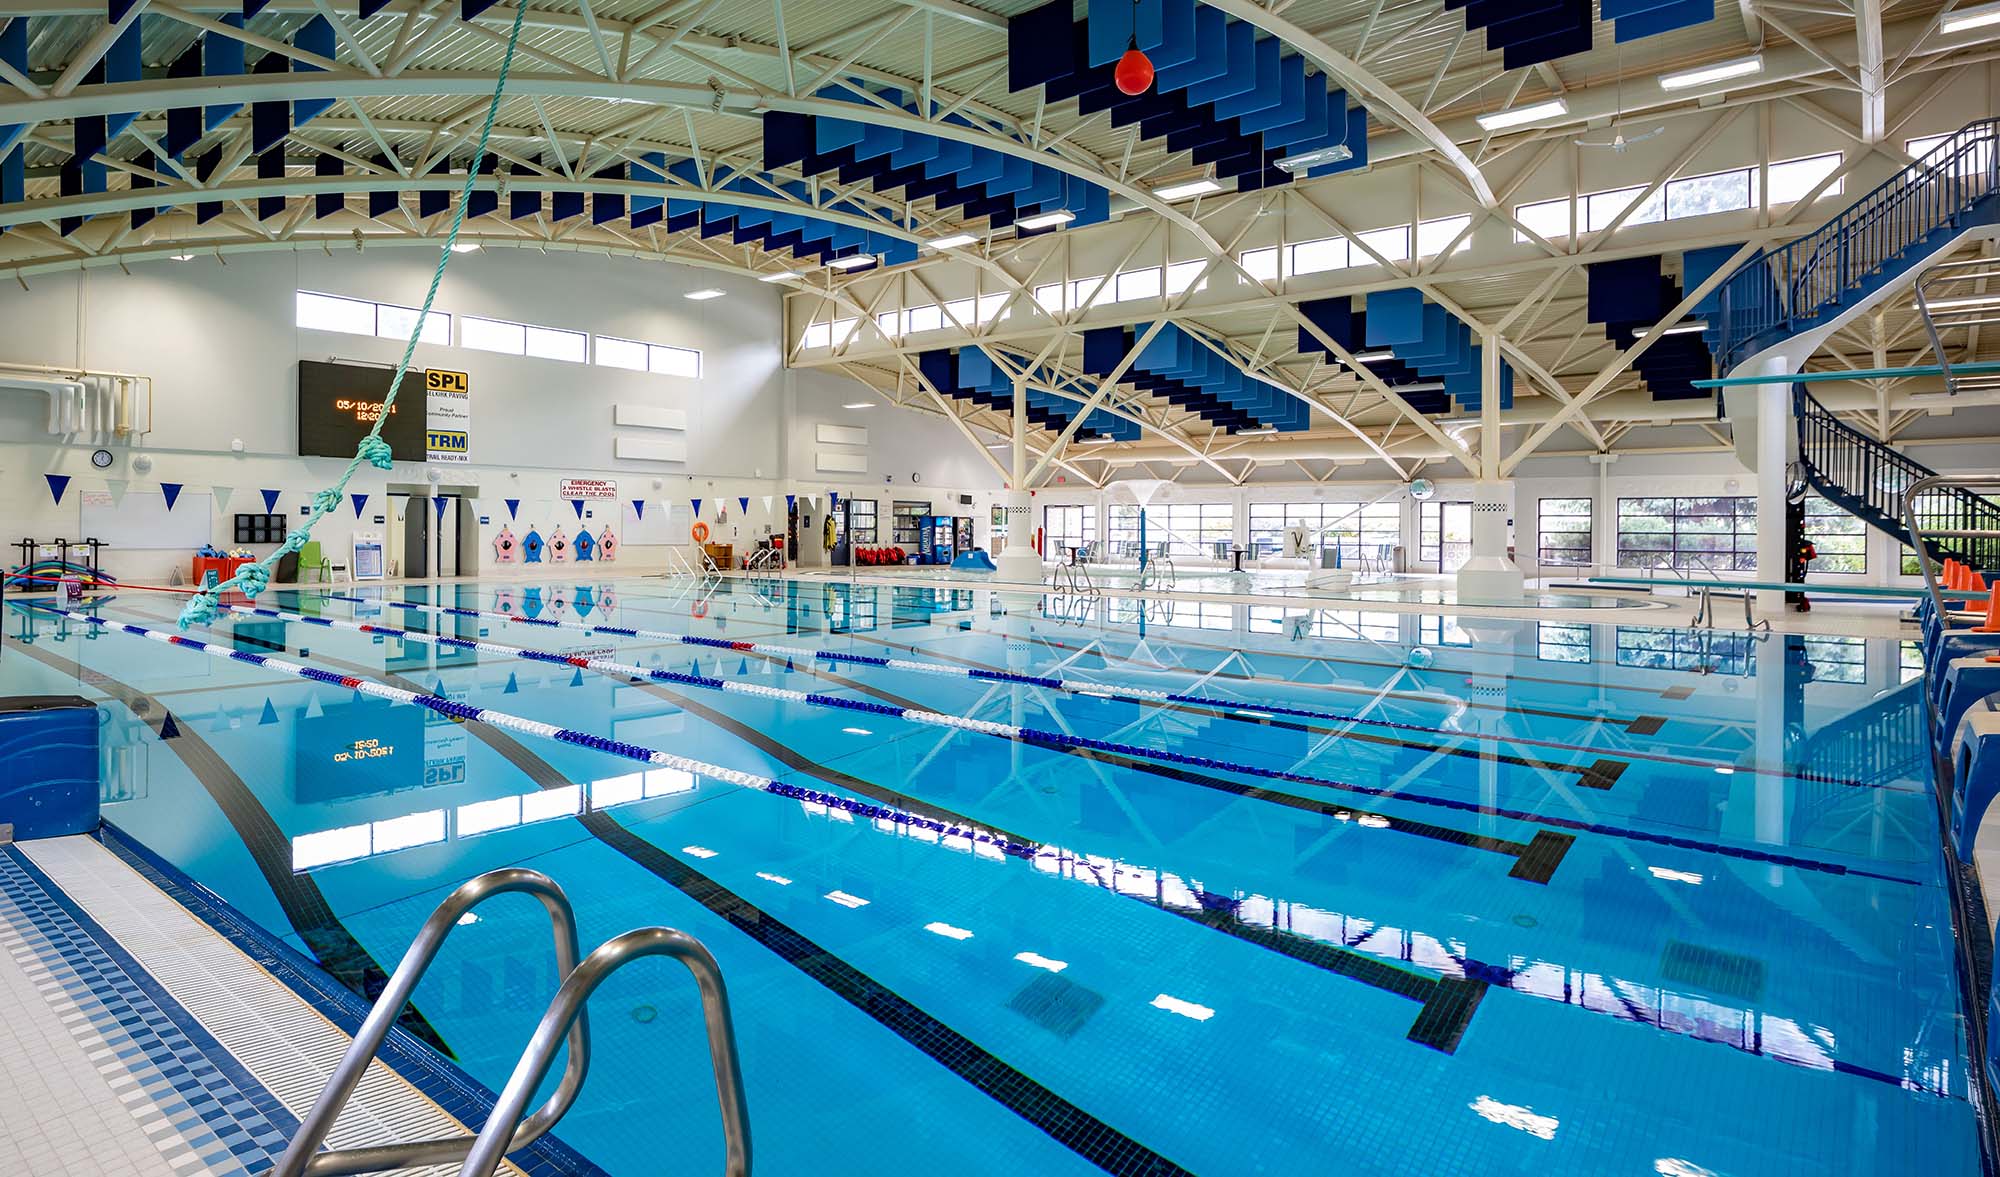 Trail Aquatic Centre re-opens today